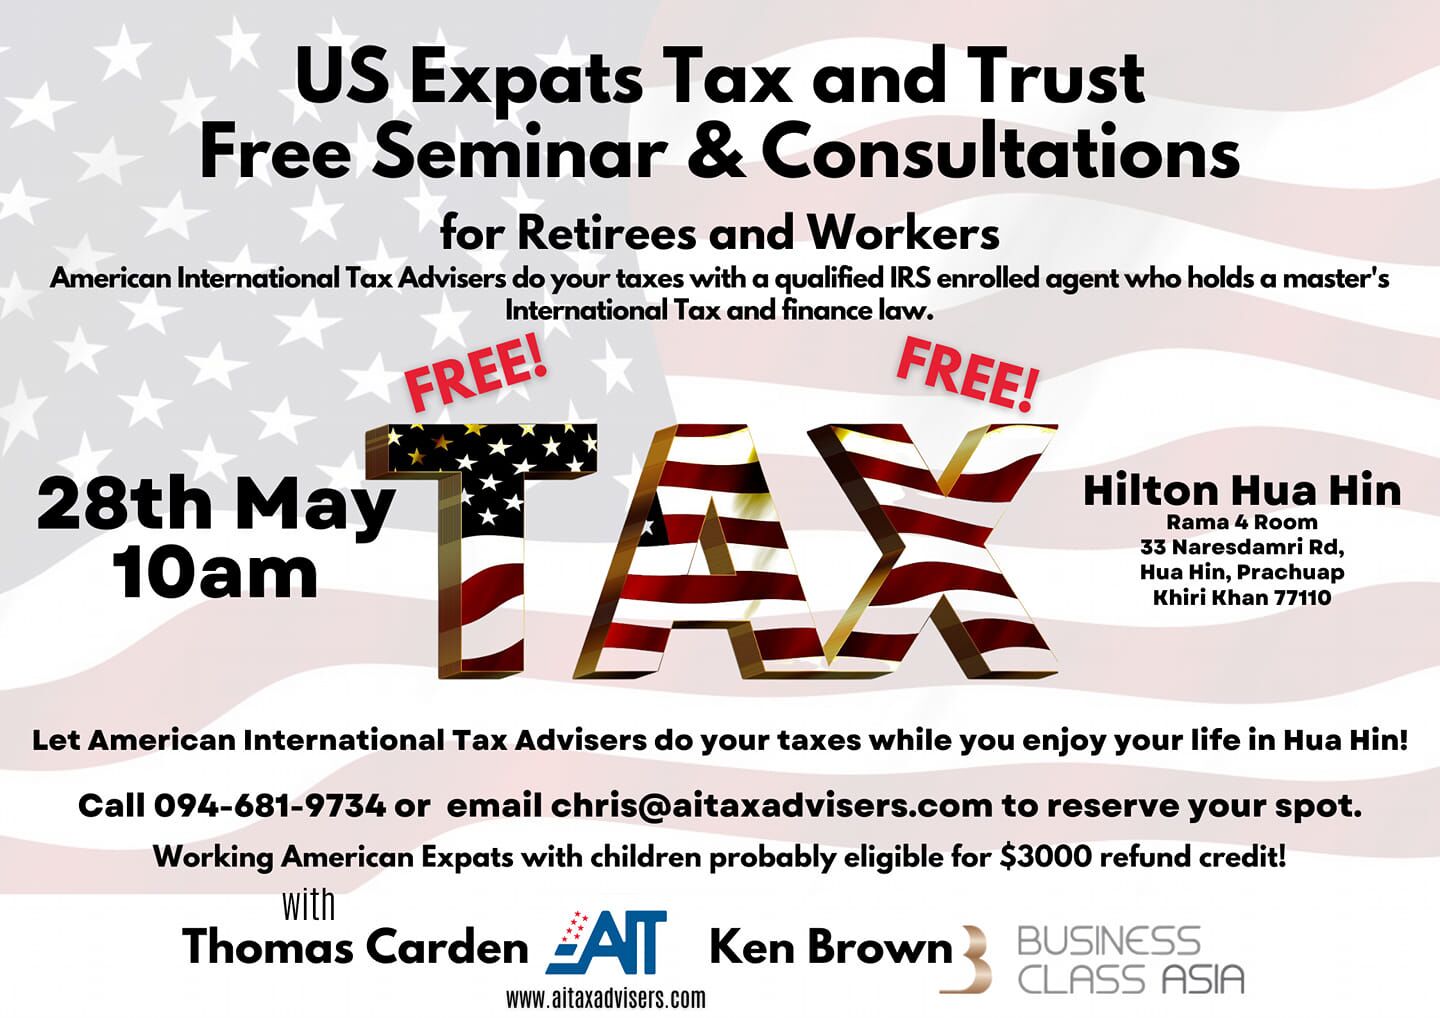 US Expats Tax and Trust Free Seminar and Consultations